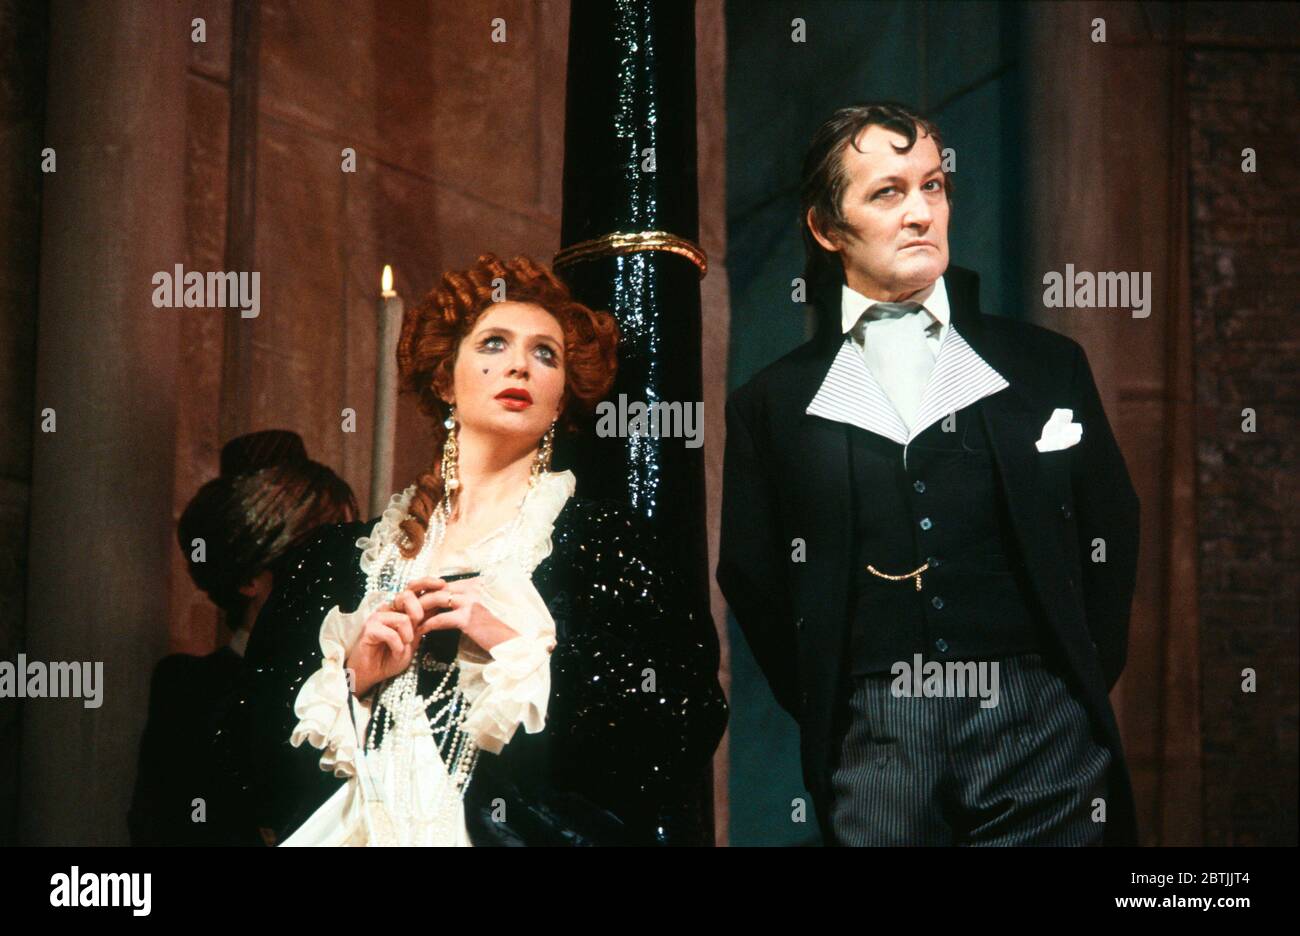 Joanna McCallum (Marguerite Blakeney), Charles Kay (Chauvelin) in THE SCARLET PIMPERNEL by Baroness Orczy at Her Majesty's Theatre, Haymarket, London SW1 11/12/1985   a Chichester Festival Theatre production  adapted by Beverley Cross  music: Jeremy Sams  design: Mark Thompson  lighting: Mark Henderson  fights: Malcolm Ranson  director: Nicholas Hytner Stock Photo